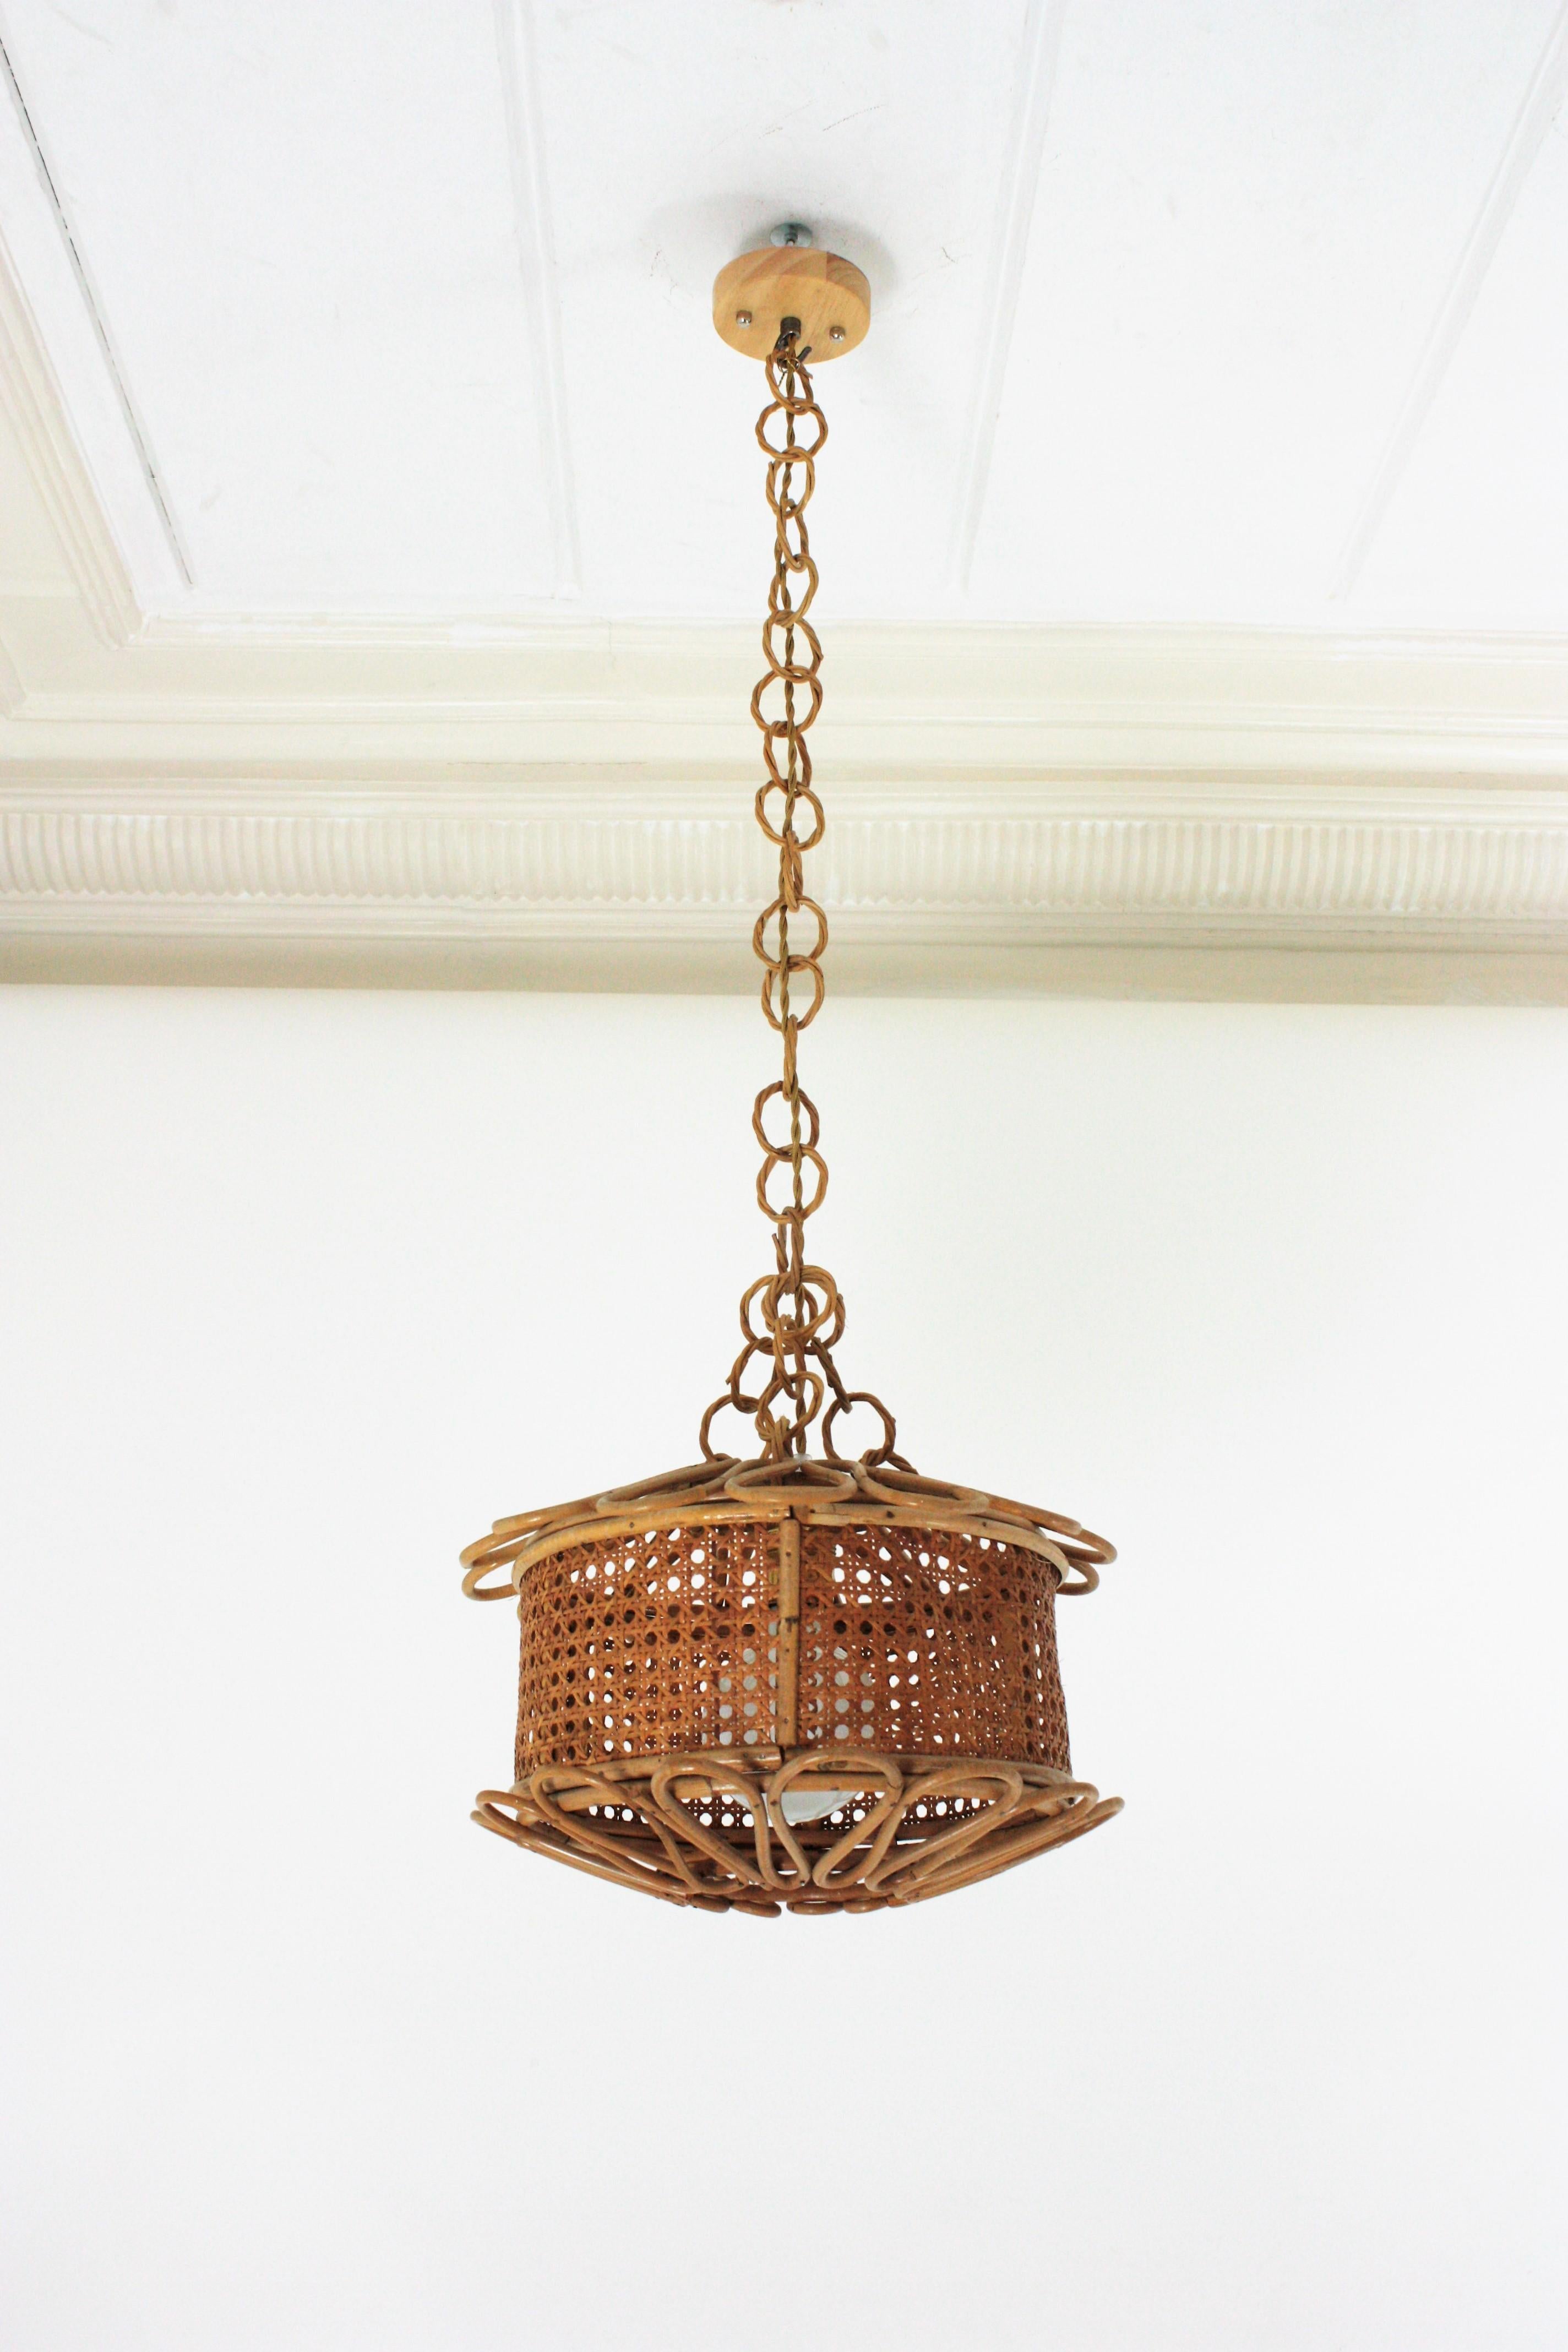 Woven Italian Modernist Wicker Wire and Rattan Pendant Hanging Light, 1950s